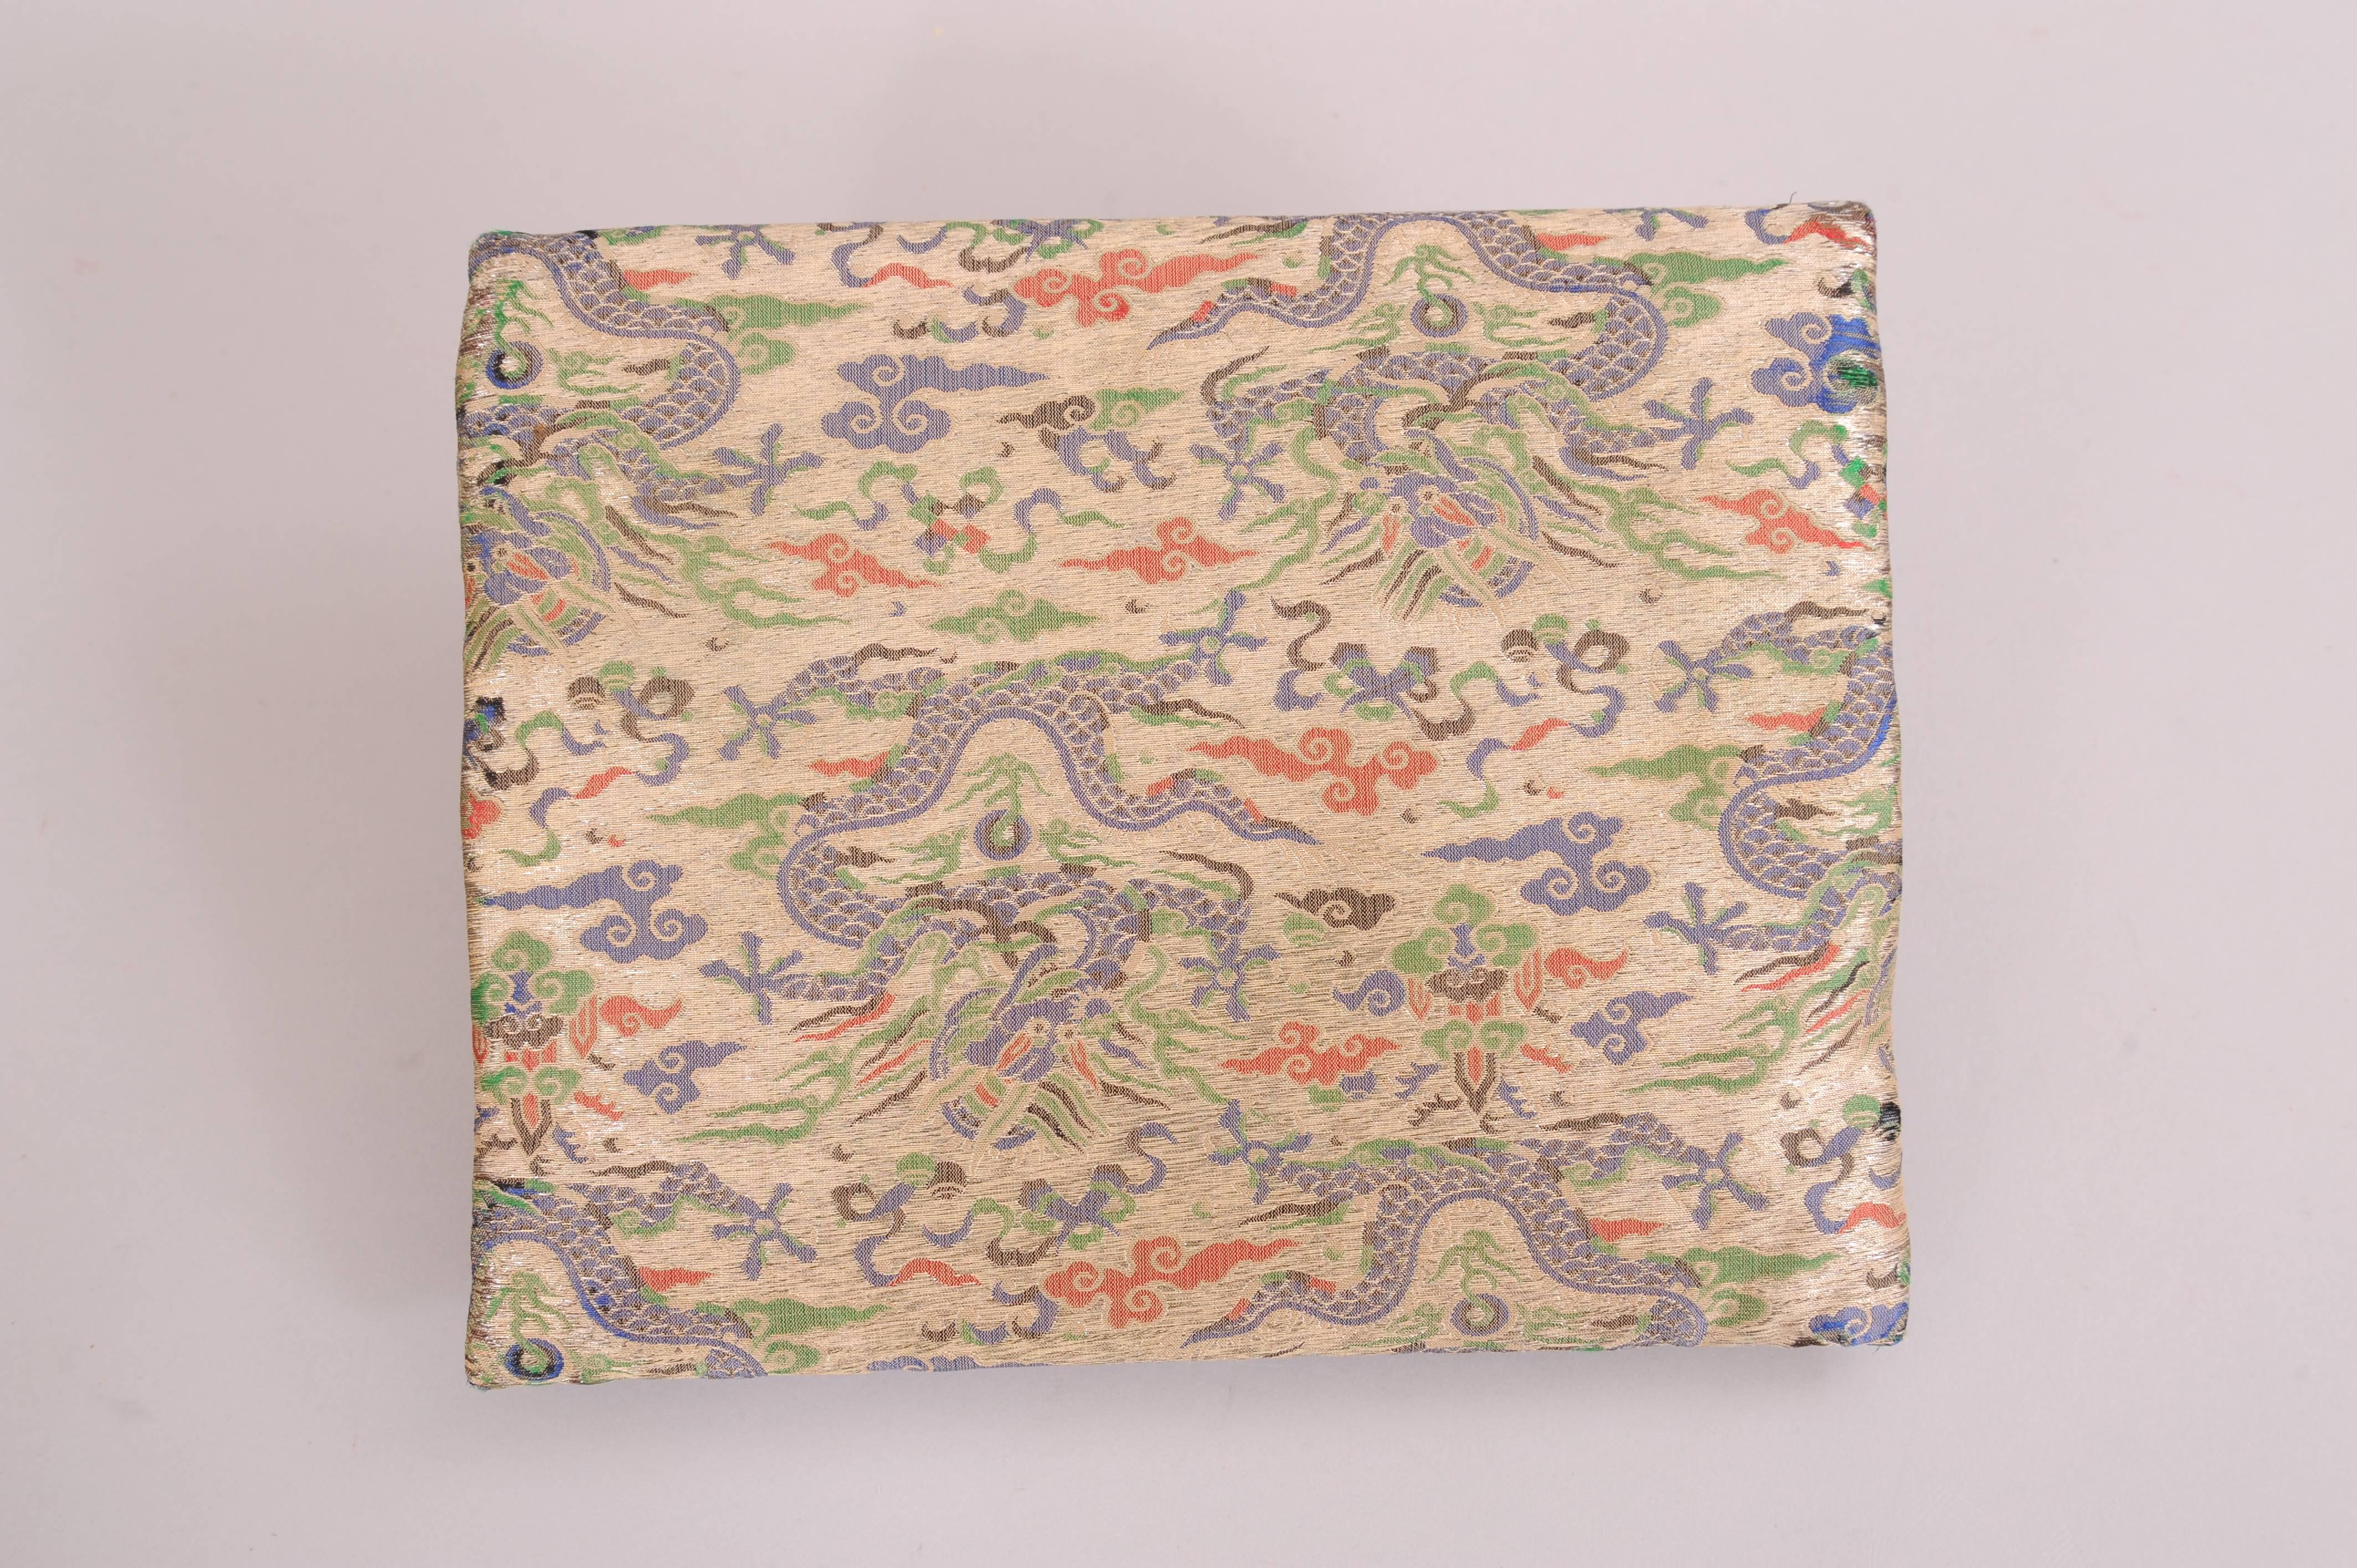 This fold over clutch in a metallic woven fabric has Asian inspired dragons and clouds in red, blue and green. There is an interior hinged frame, a satin lining and one slip pocket. The bag comes from the J.P. Morgan family by way of a museum de